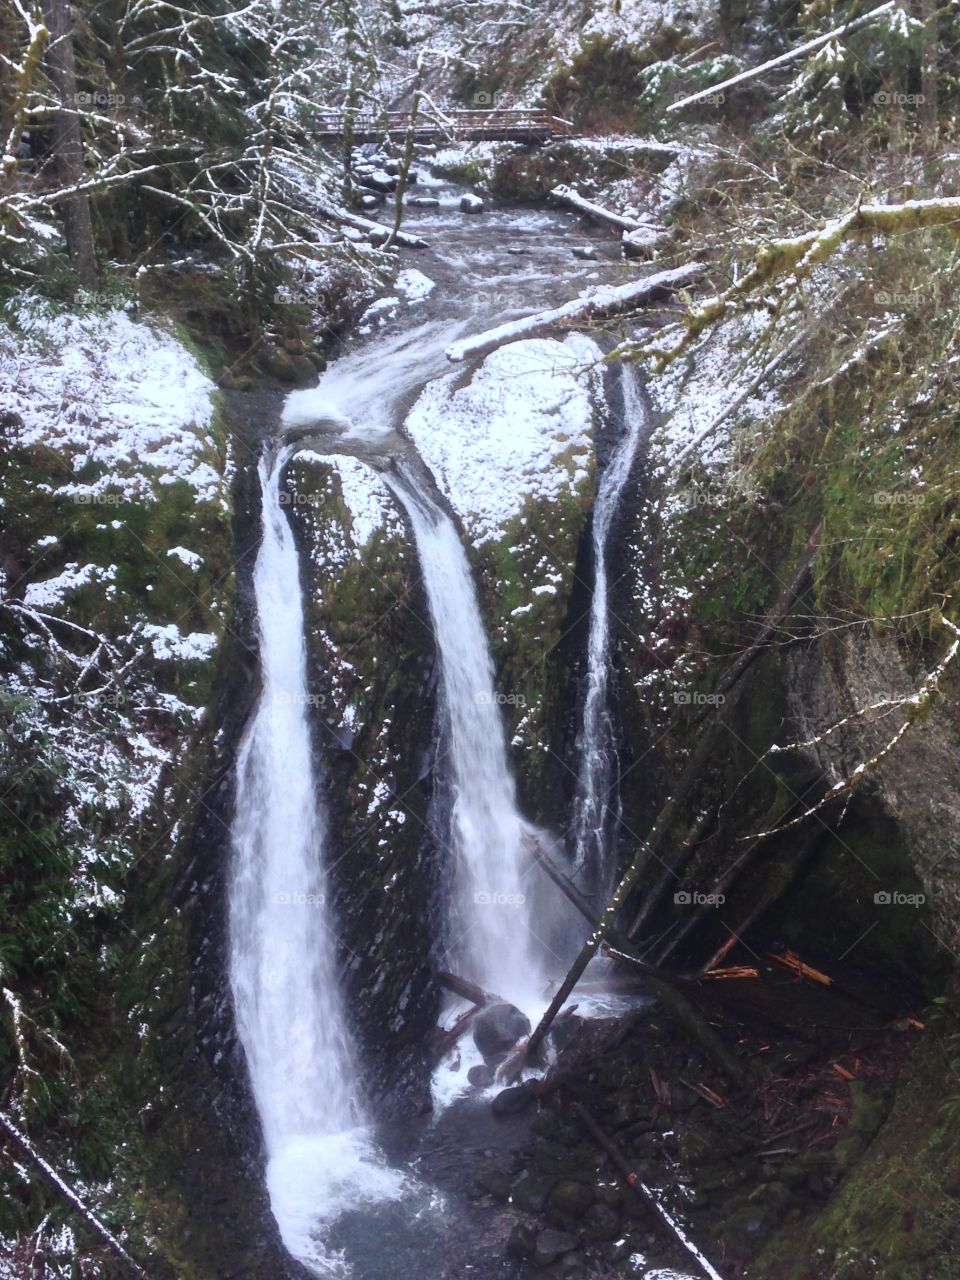 Winter at triple falls in the Columbia River gorge.